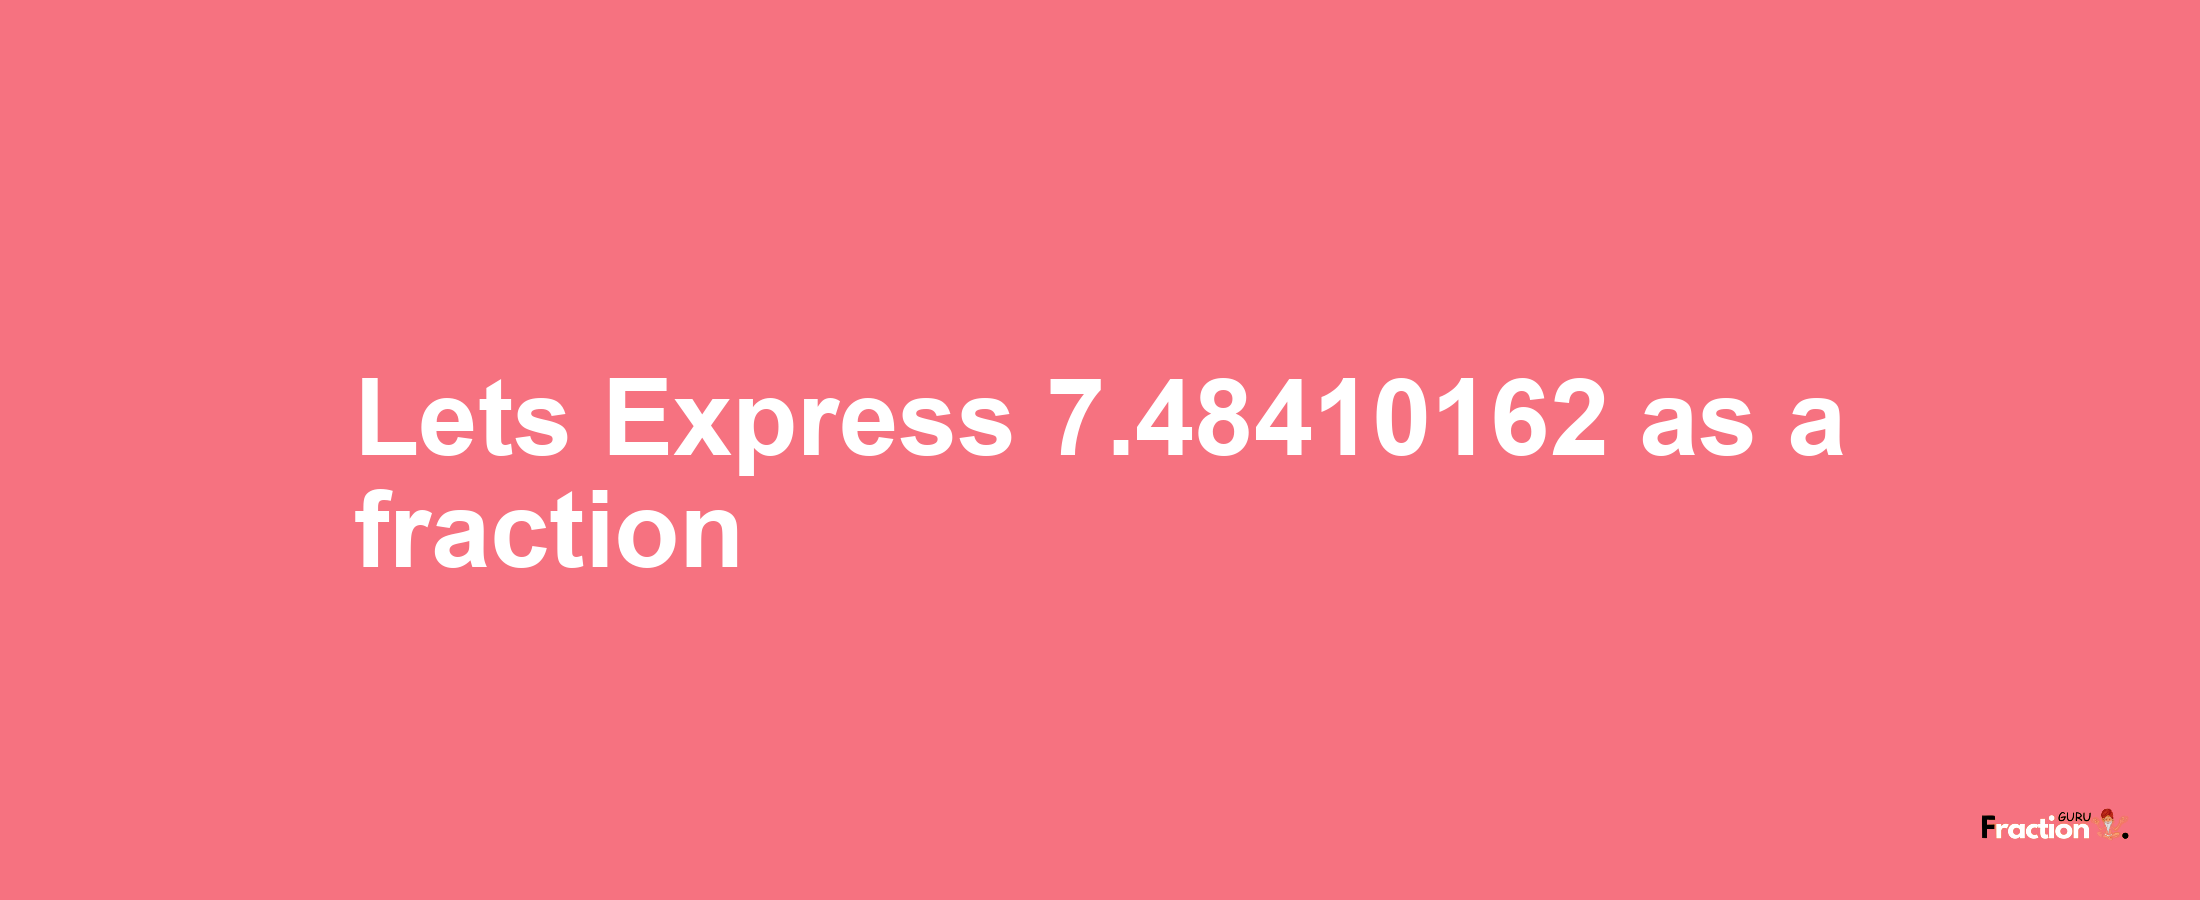 Lets Express 7.48410162 as afraction